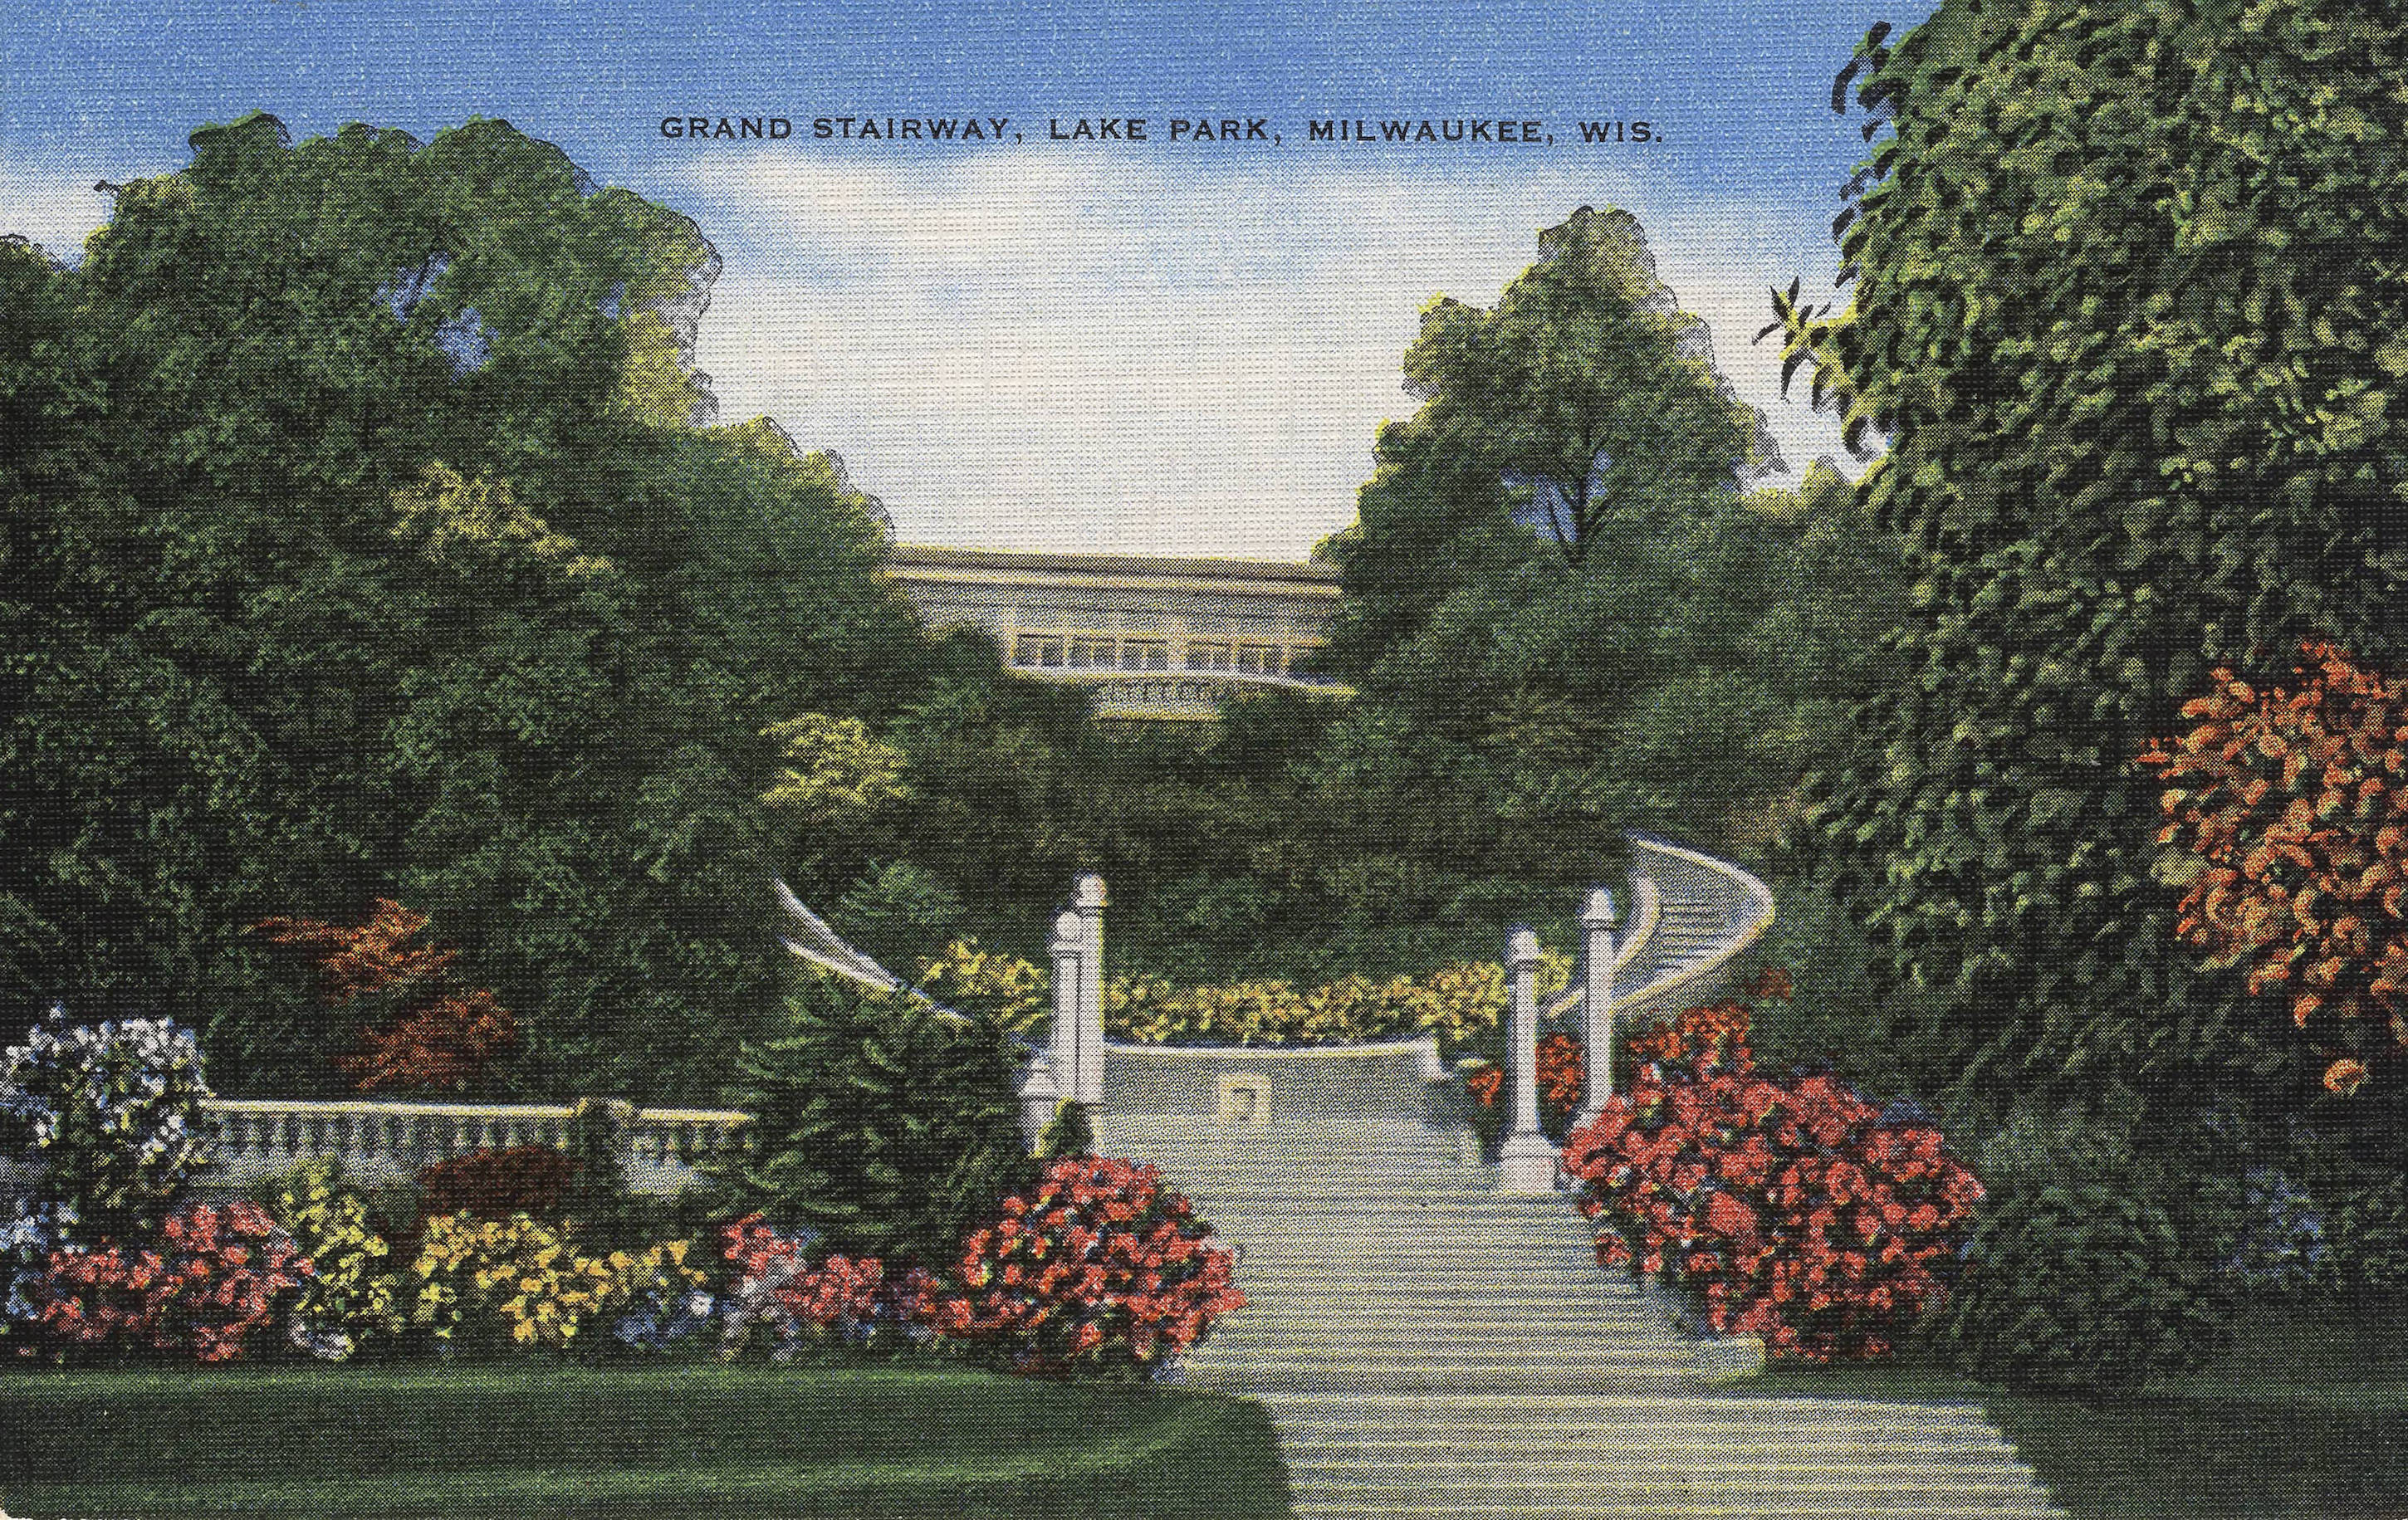 The grand staircase at Lake Park was designed by Alfred C. Clas, Milwaukee's strongest supporter of the City Beautiful movement, and completed in 1908.